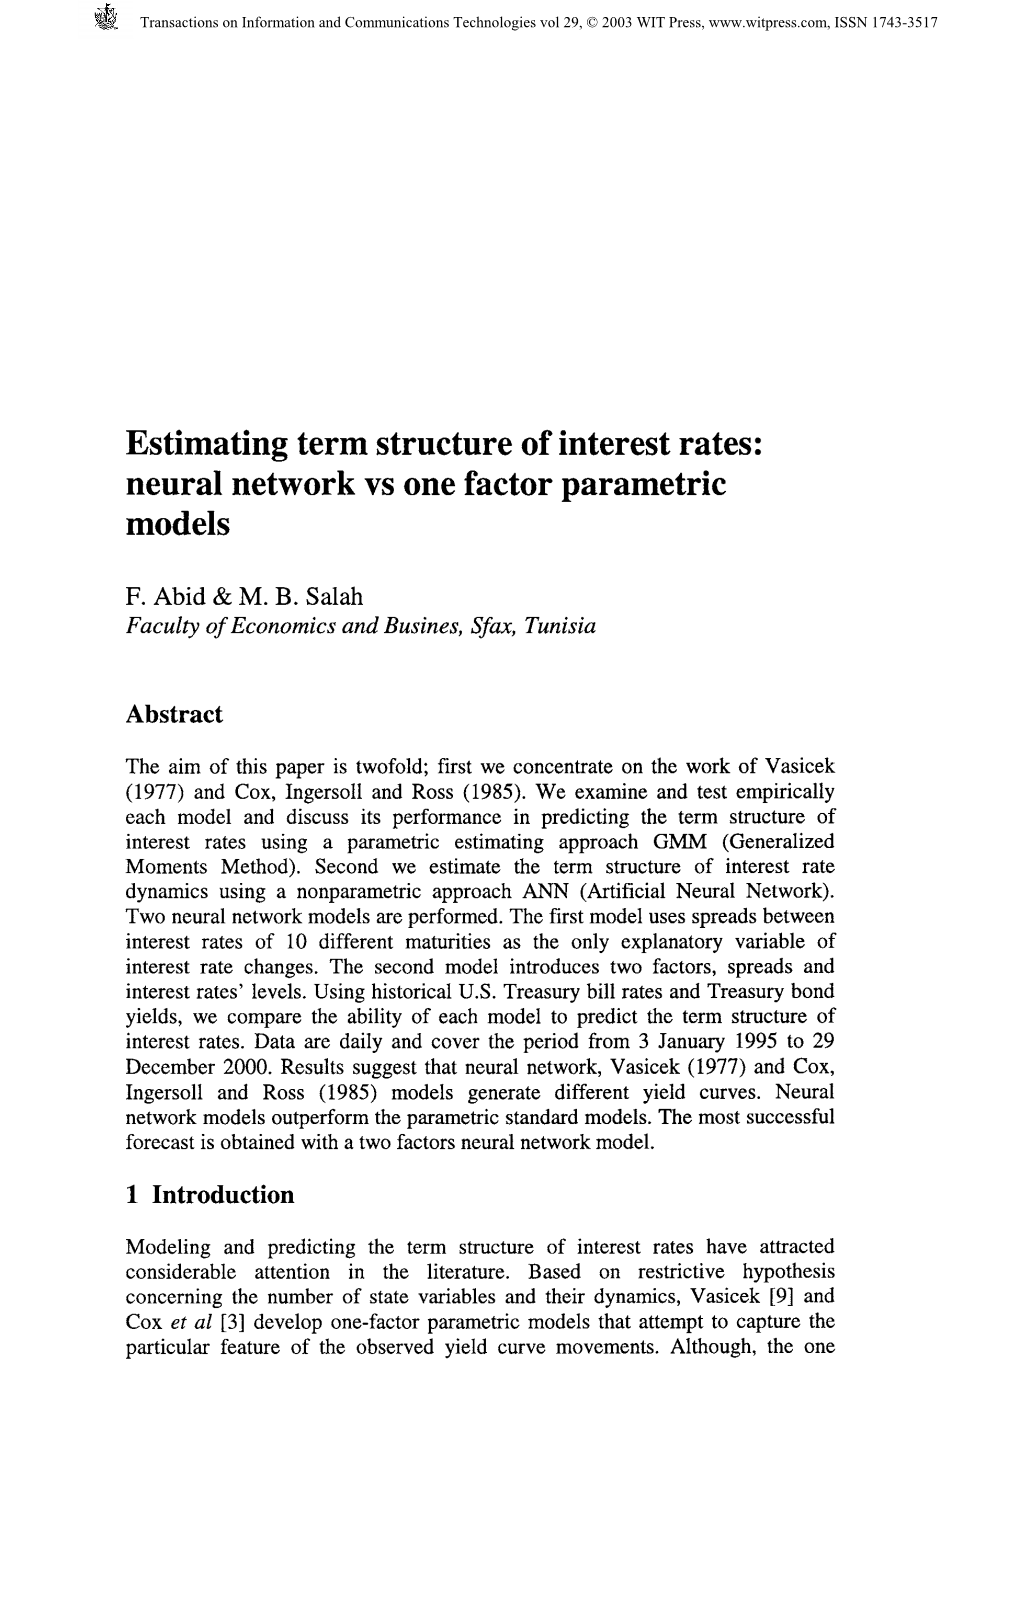 Estimating Term Structure of Interest Rates: Neural Network Vs One Factor Parametric Models